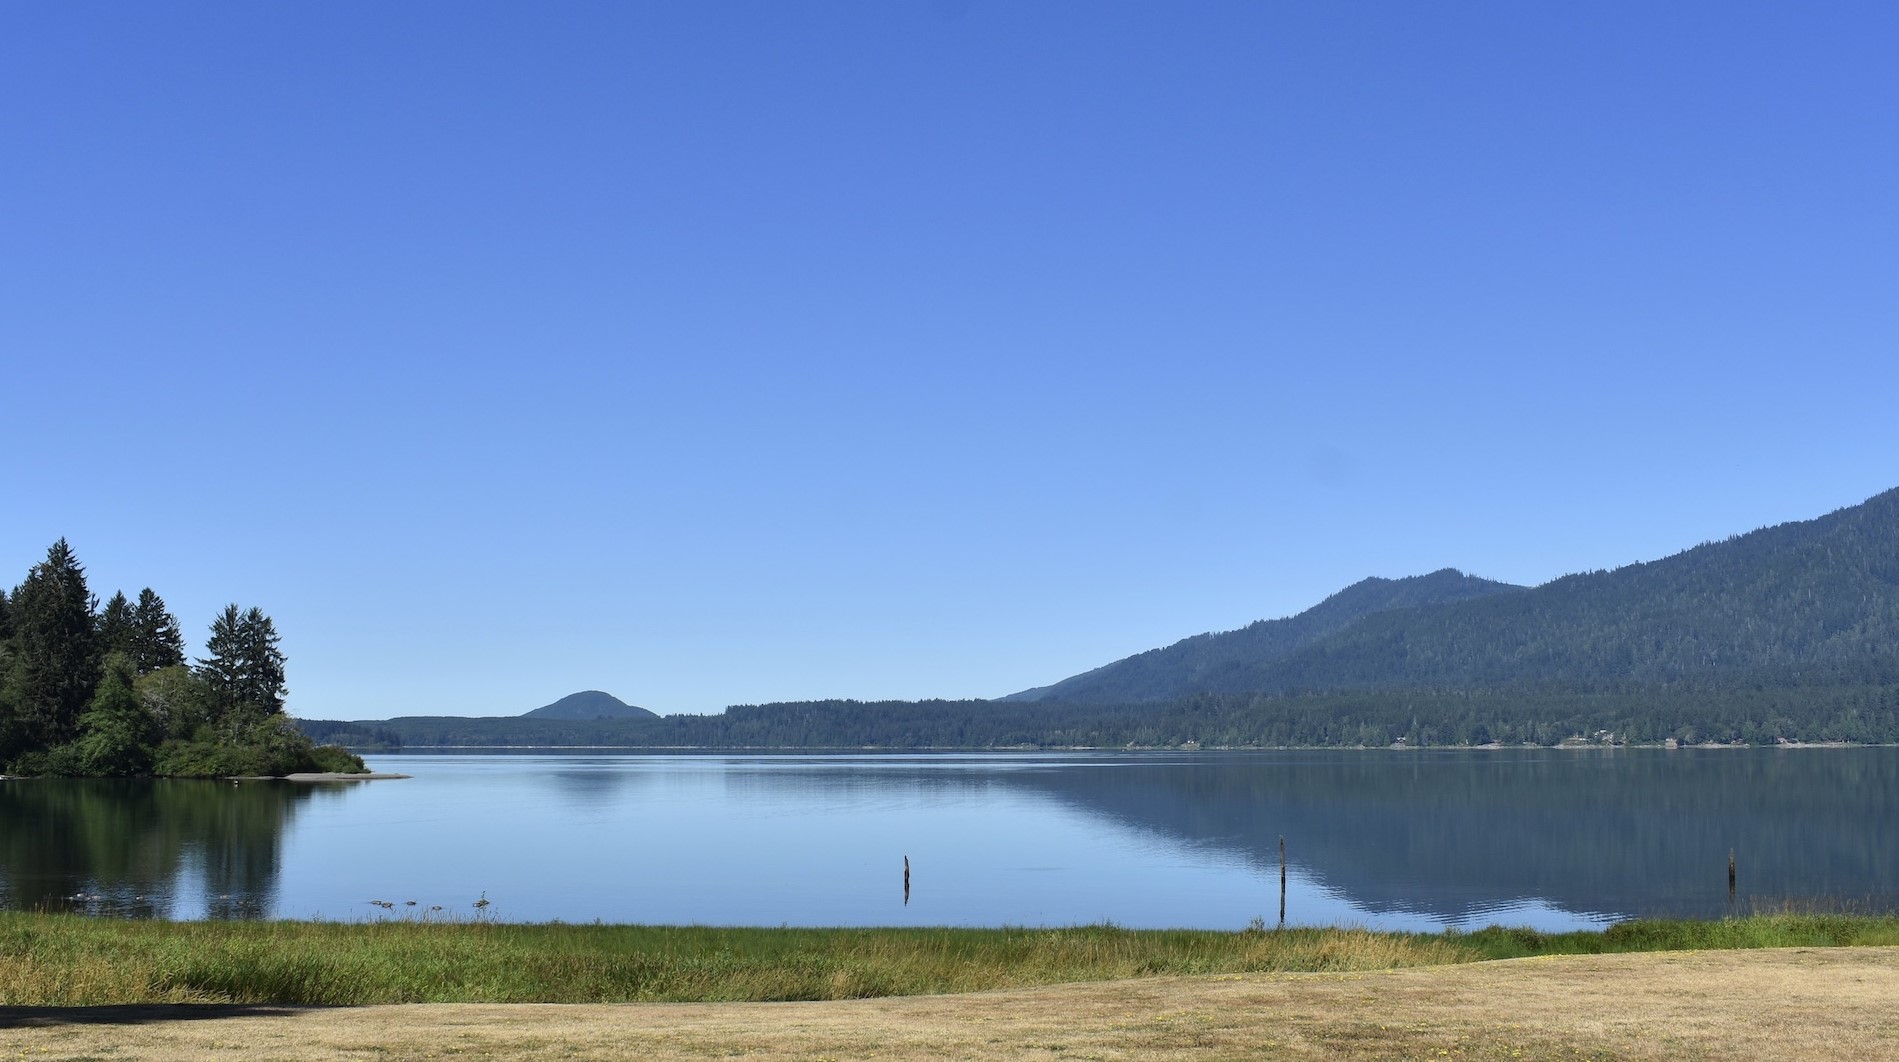 13-astounding-facts-about-lake-quinault